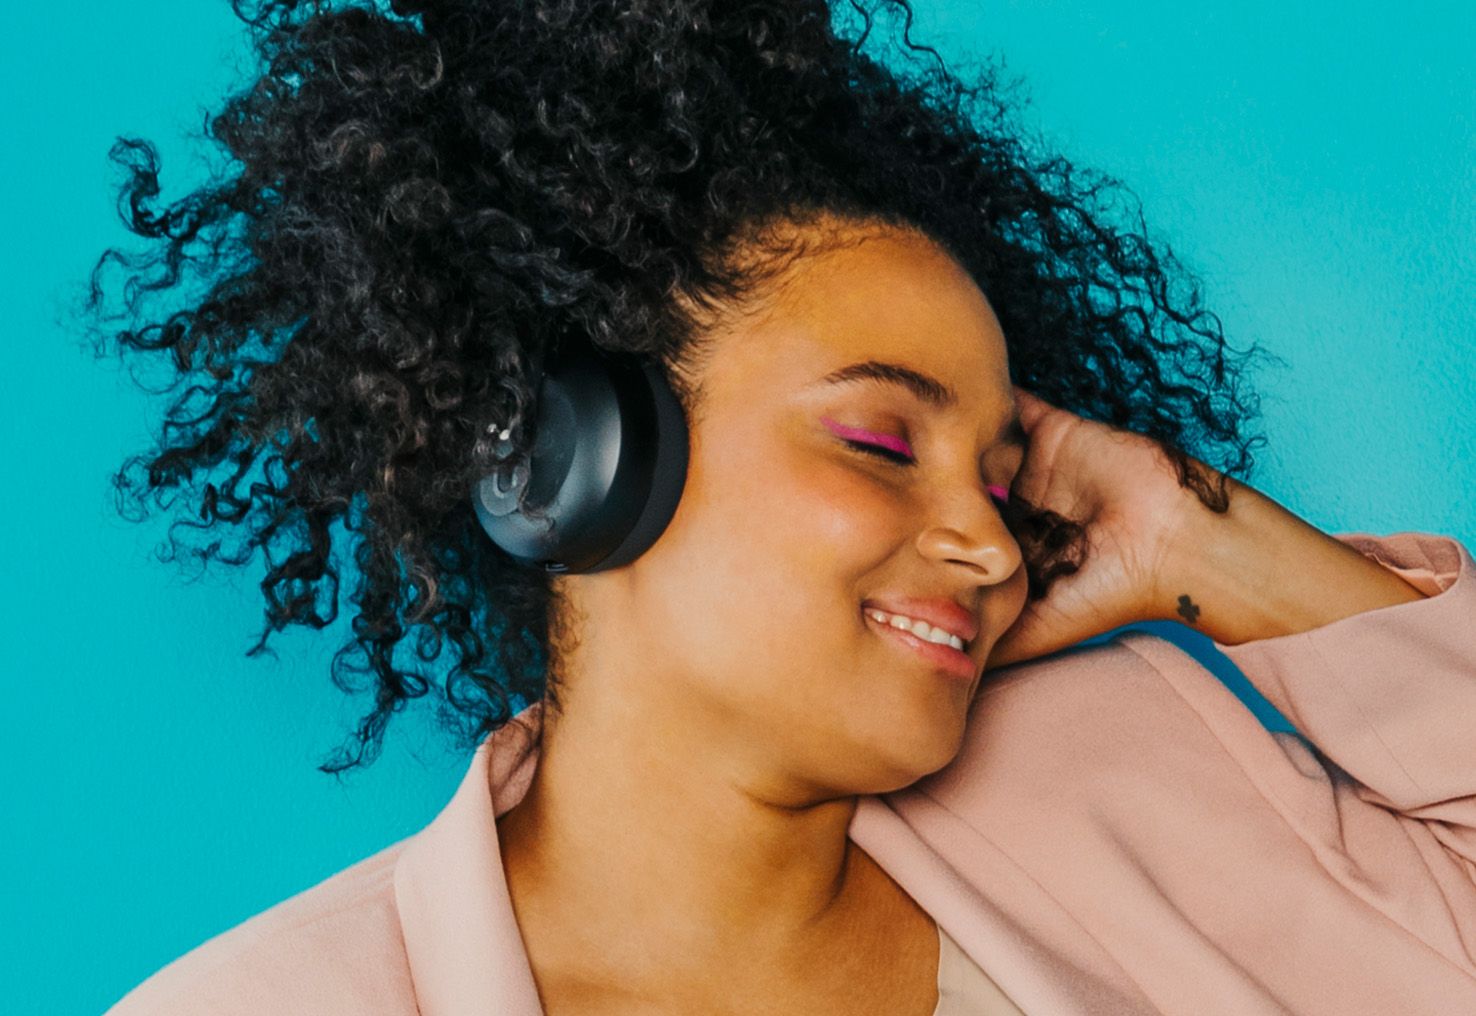 Person with eyes closed with NURAPHONE headphones on listening to sound